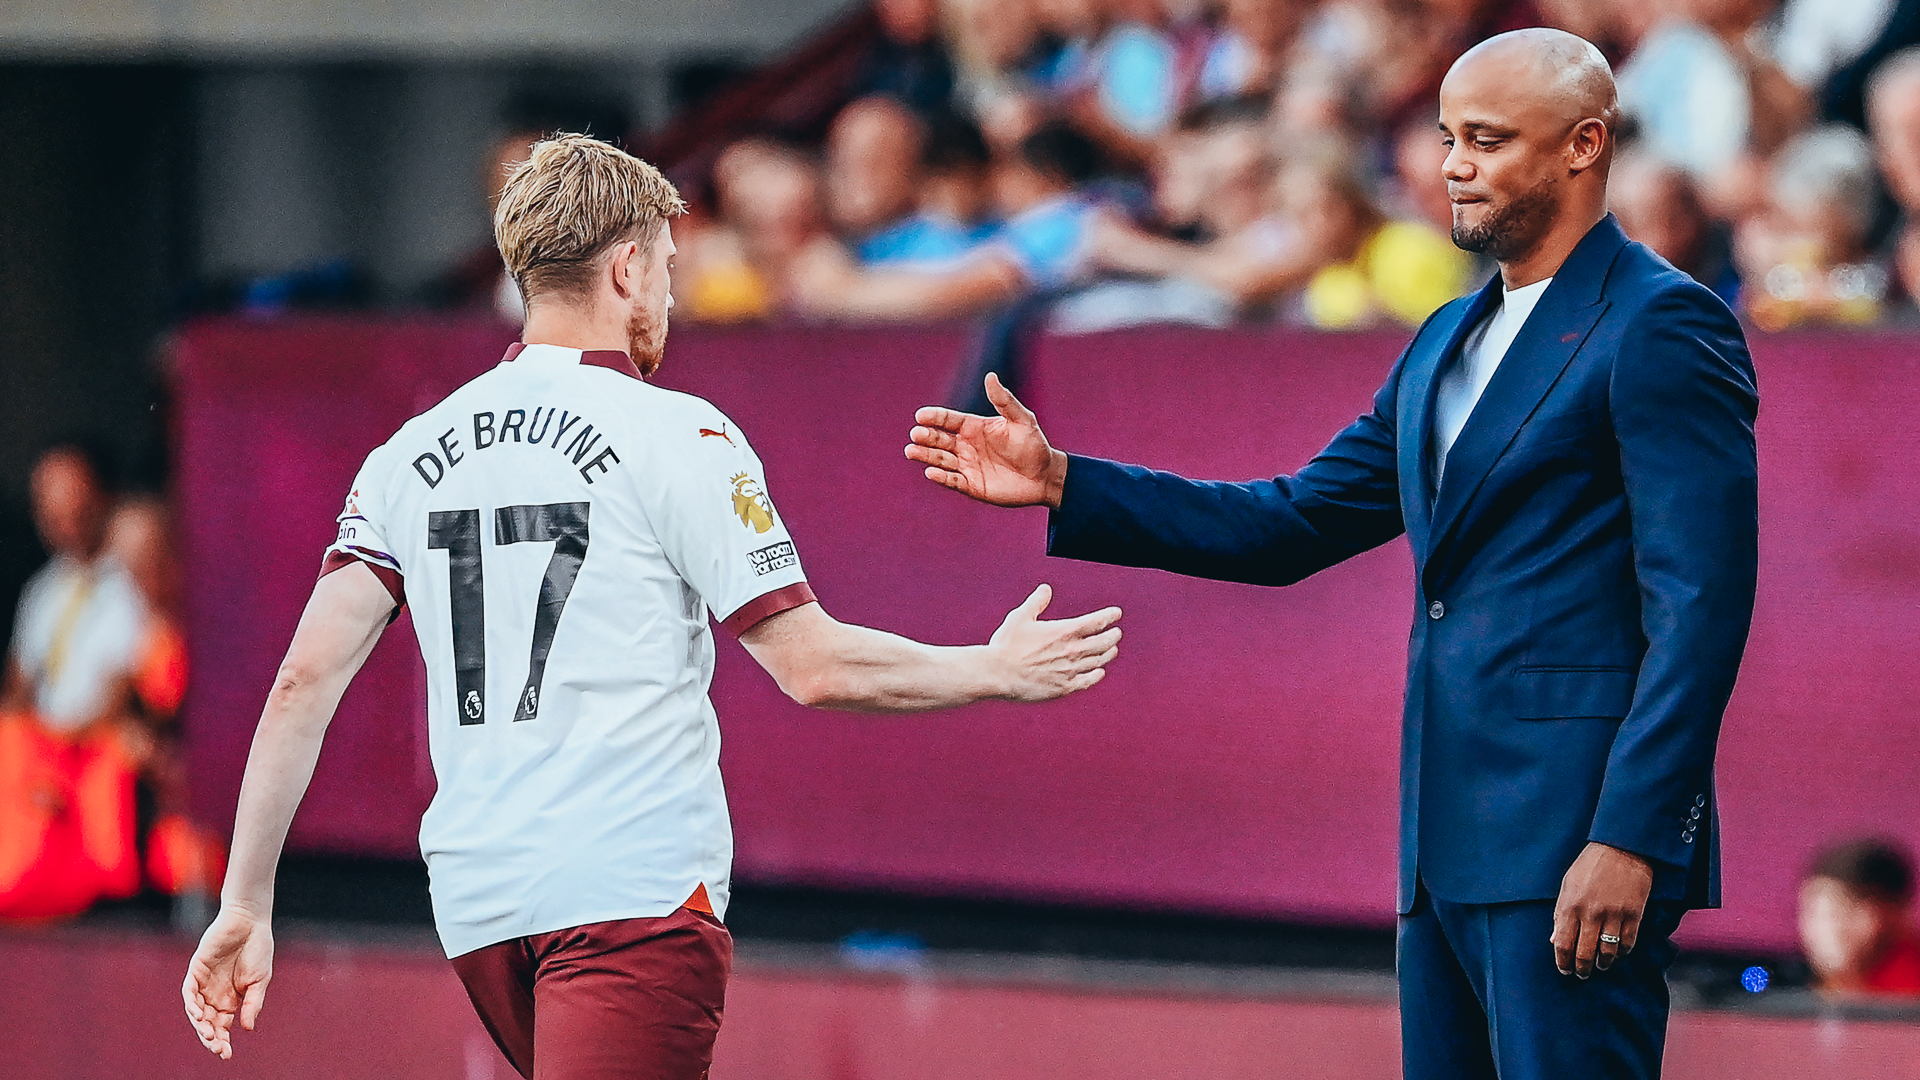 CONSOLING ARM: Vincent Kompany commiserates with De Bruyne as he makes his way off the pitch.